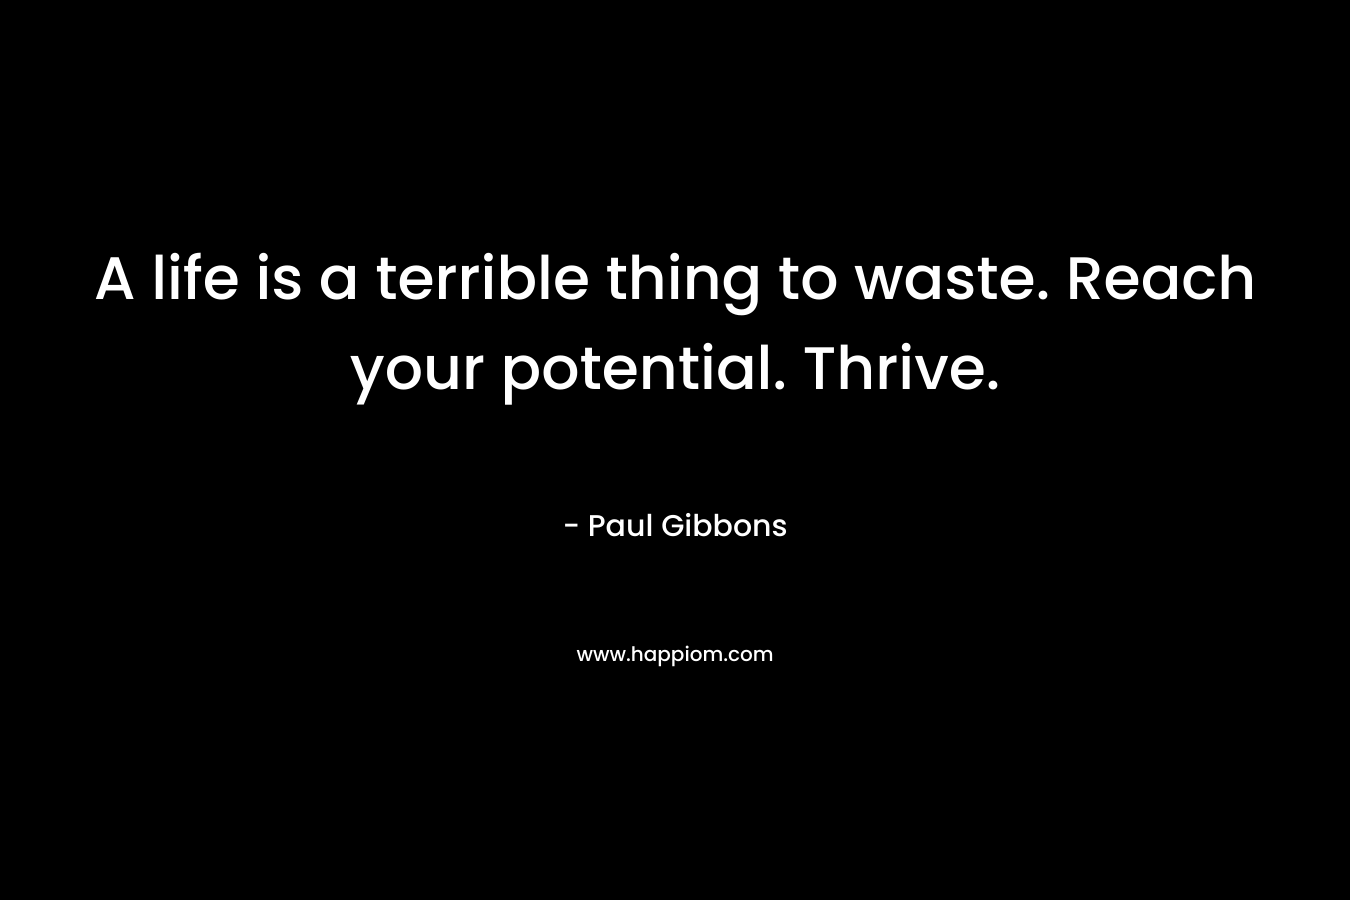 A life is a terrible thing to waste. Reach your potential. Thrive. – Paul Gibbons